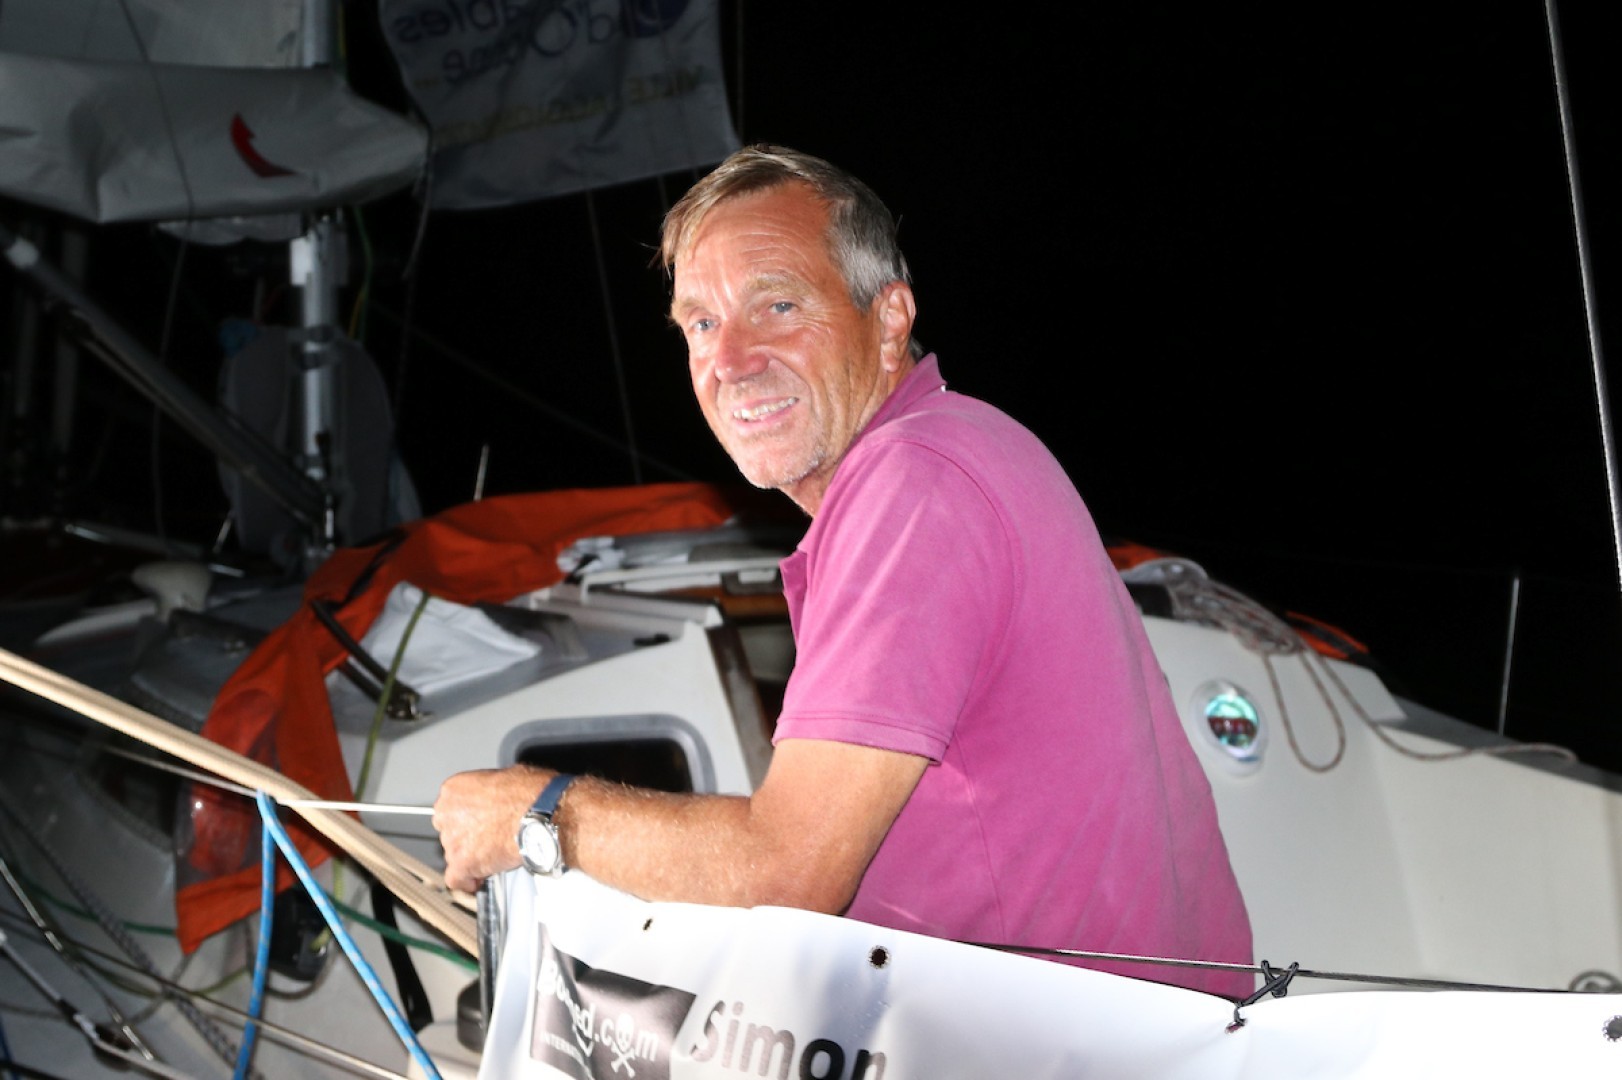 Simon Curwen passed the Lanzarote waypoint in first position. He has been leading since Cape Finisterre, showing seamanship, speed, strategic intelligence and pleasure at sea.